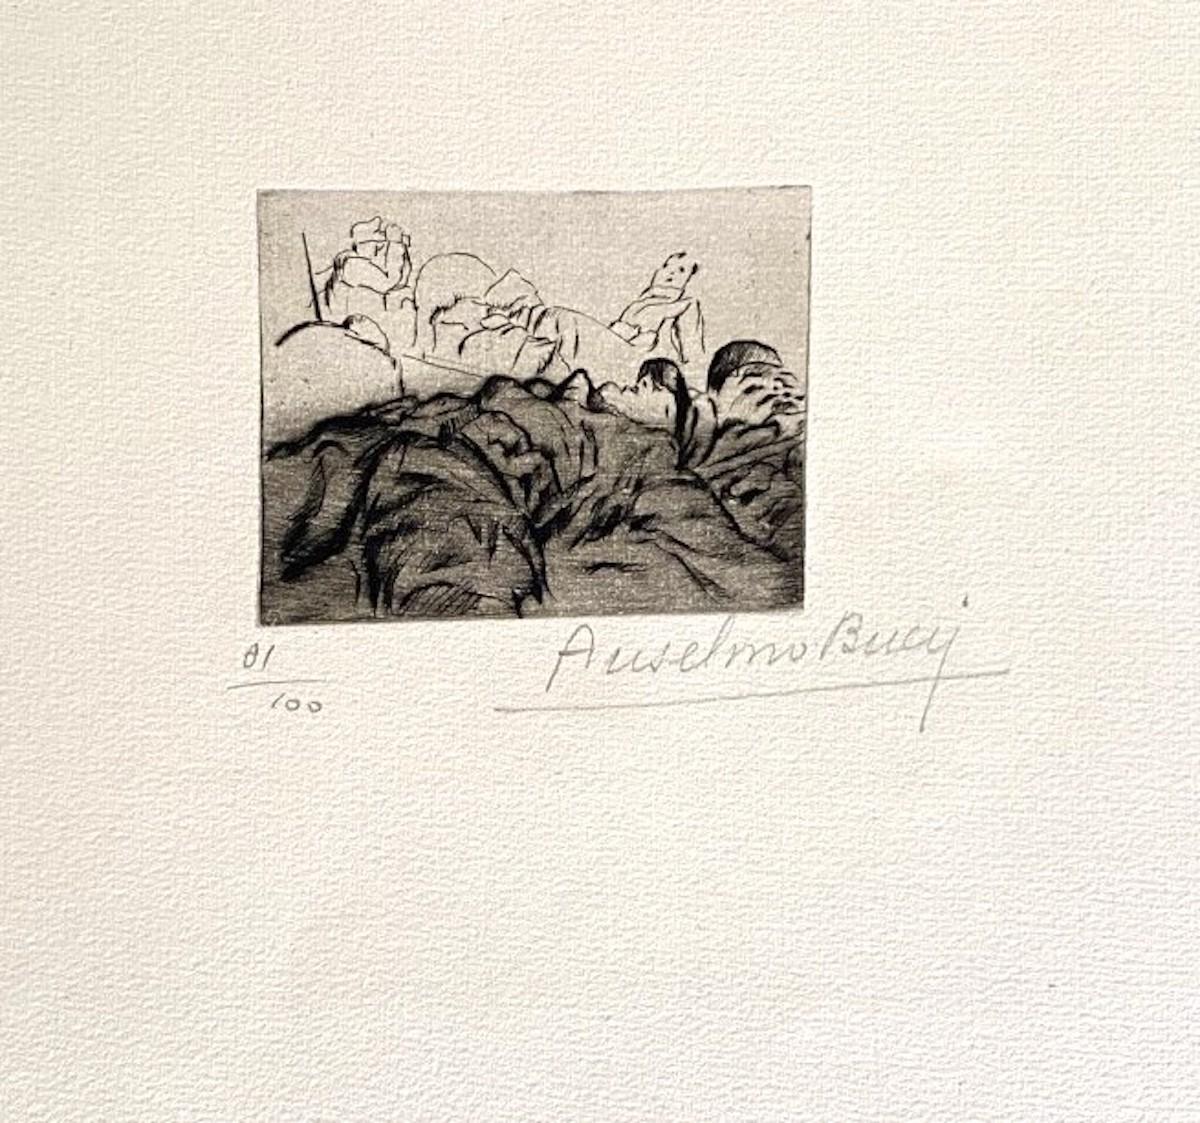 "Military" 1917s is a beautiful print in etching technique, realized by Anselmo Bucci (1887-1955).

Hand signed. Numbered 81/100 of prints on the lower left. On the lower left corner, an illegible iscription written in pencil.

Image Dimensions: 6 x